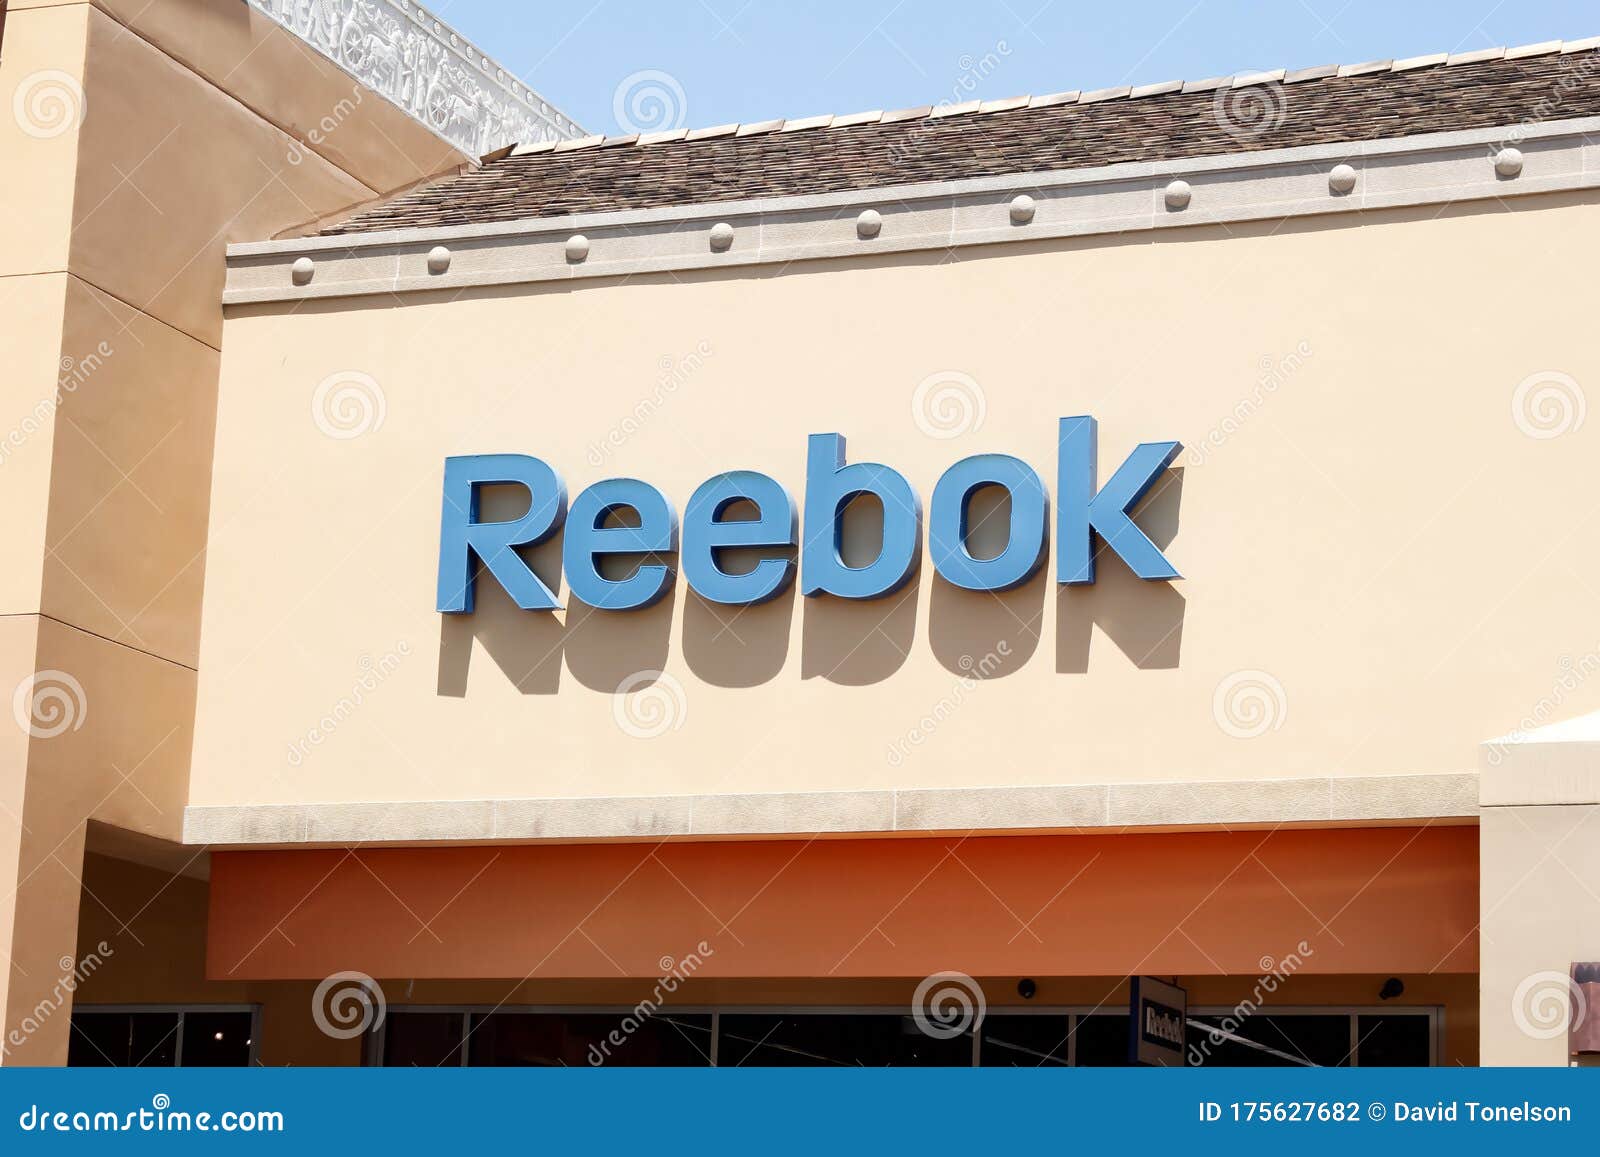 where is a reebok store located